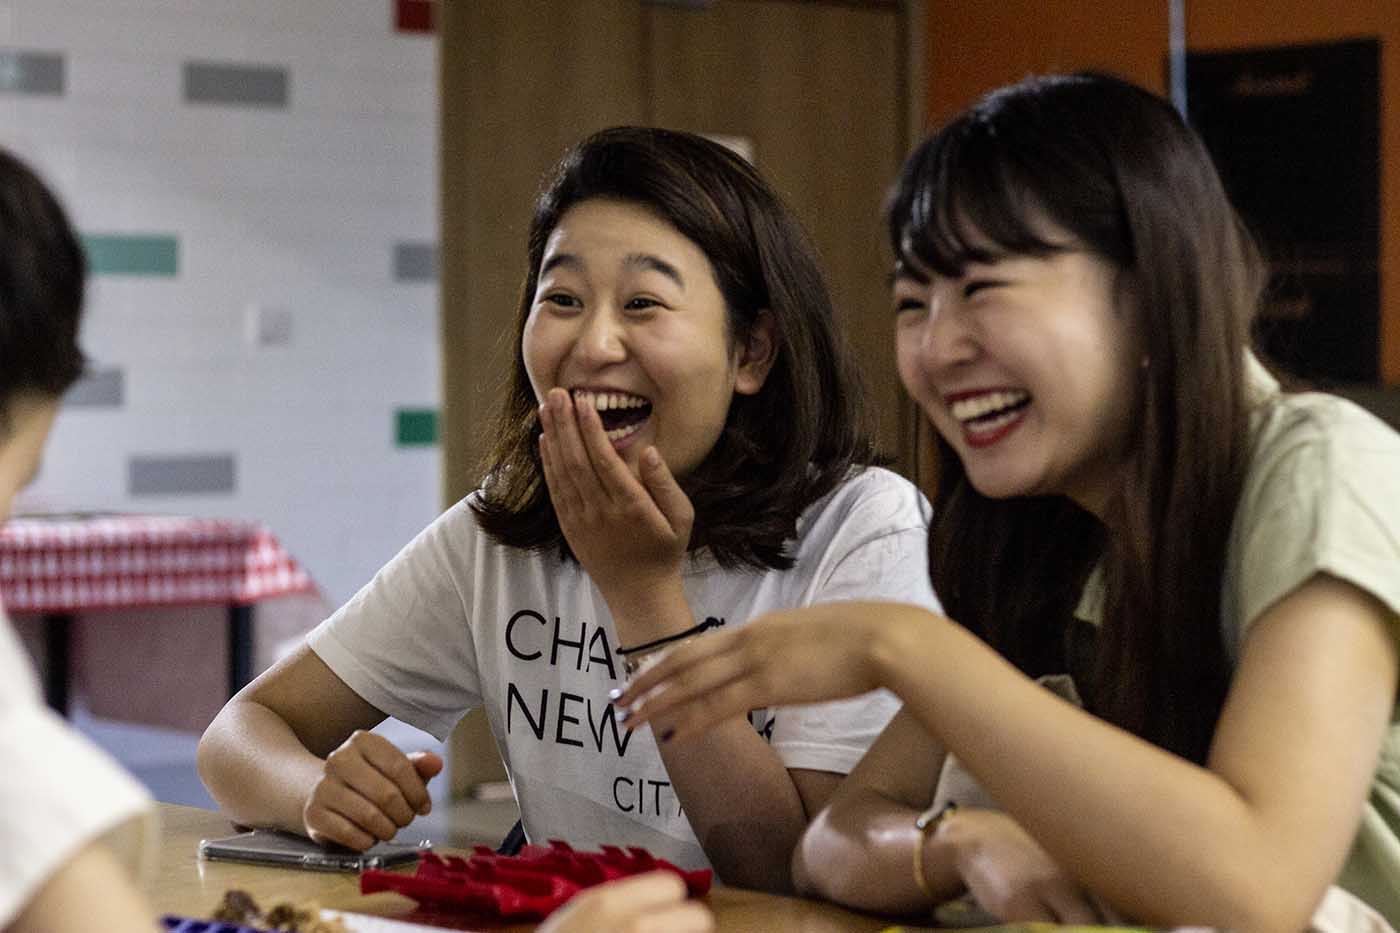 A group of students at a table laughing during a crafting session